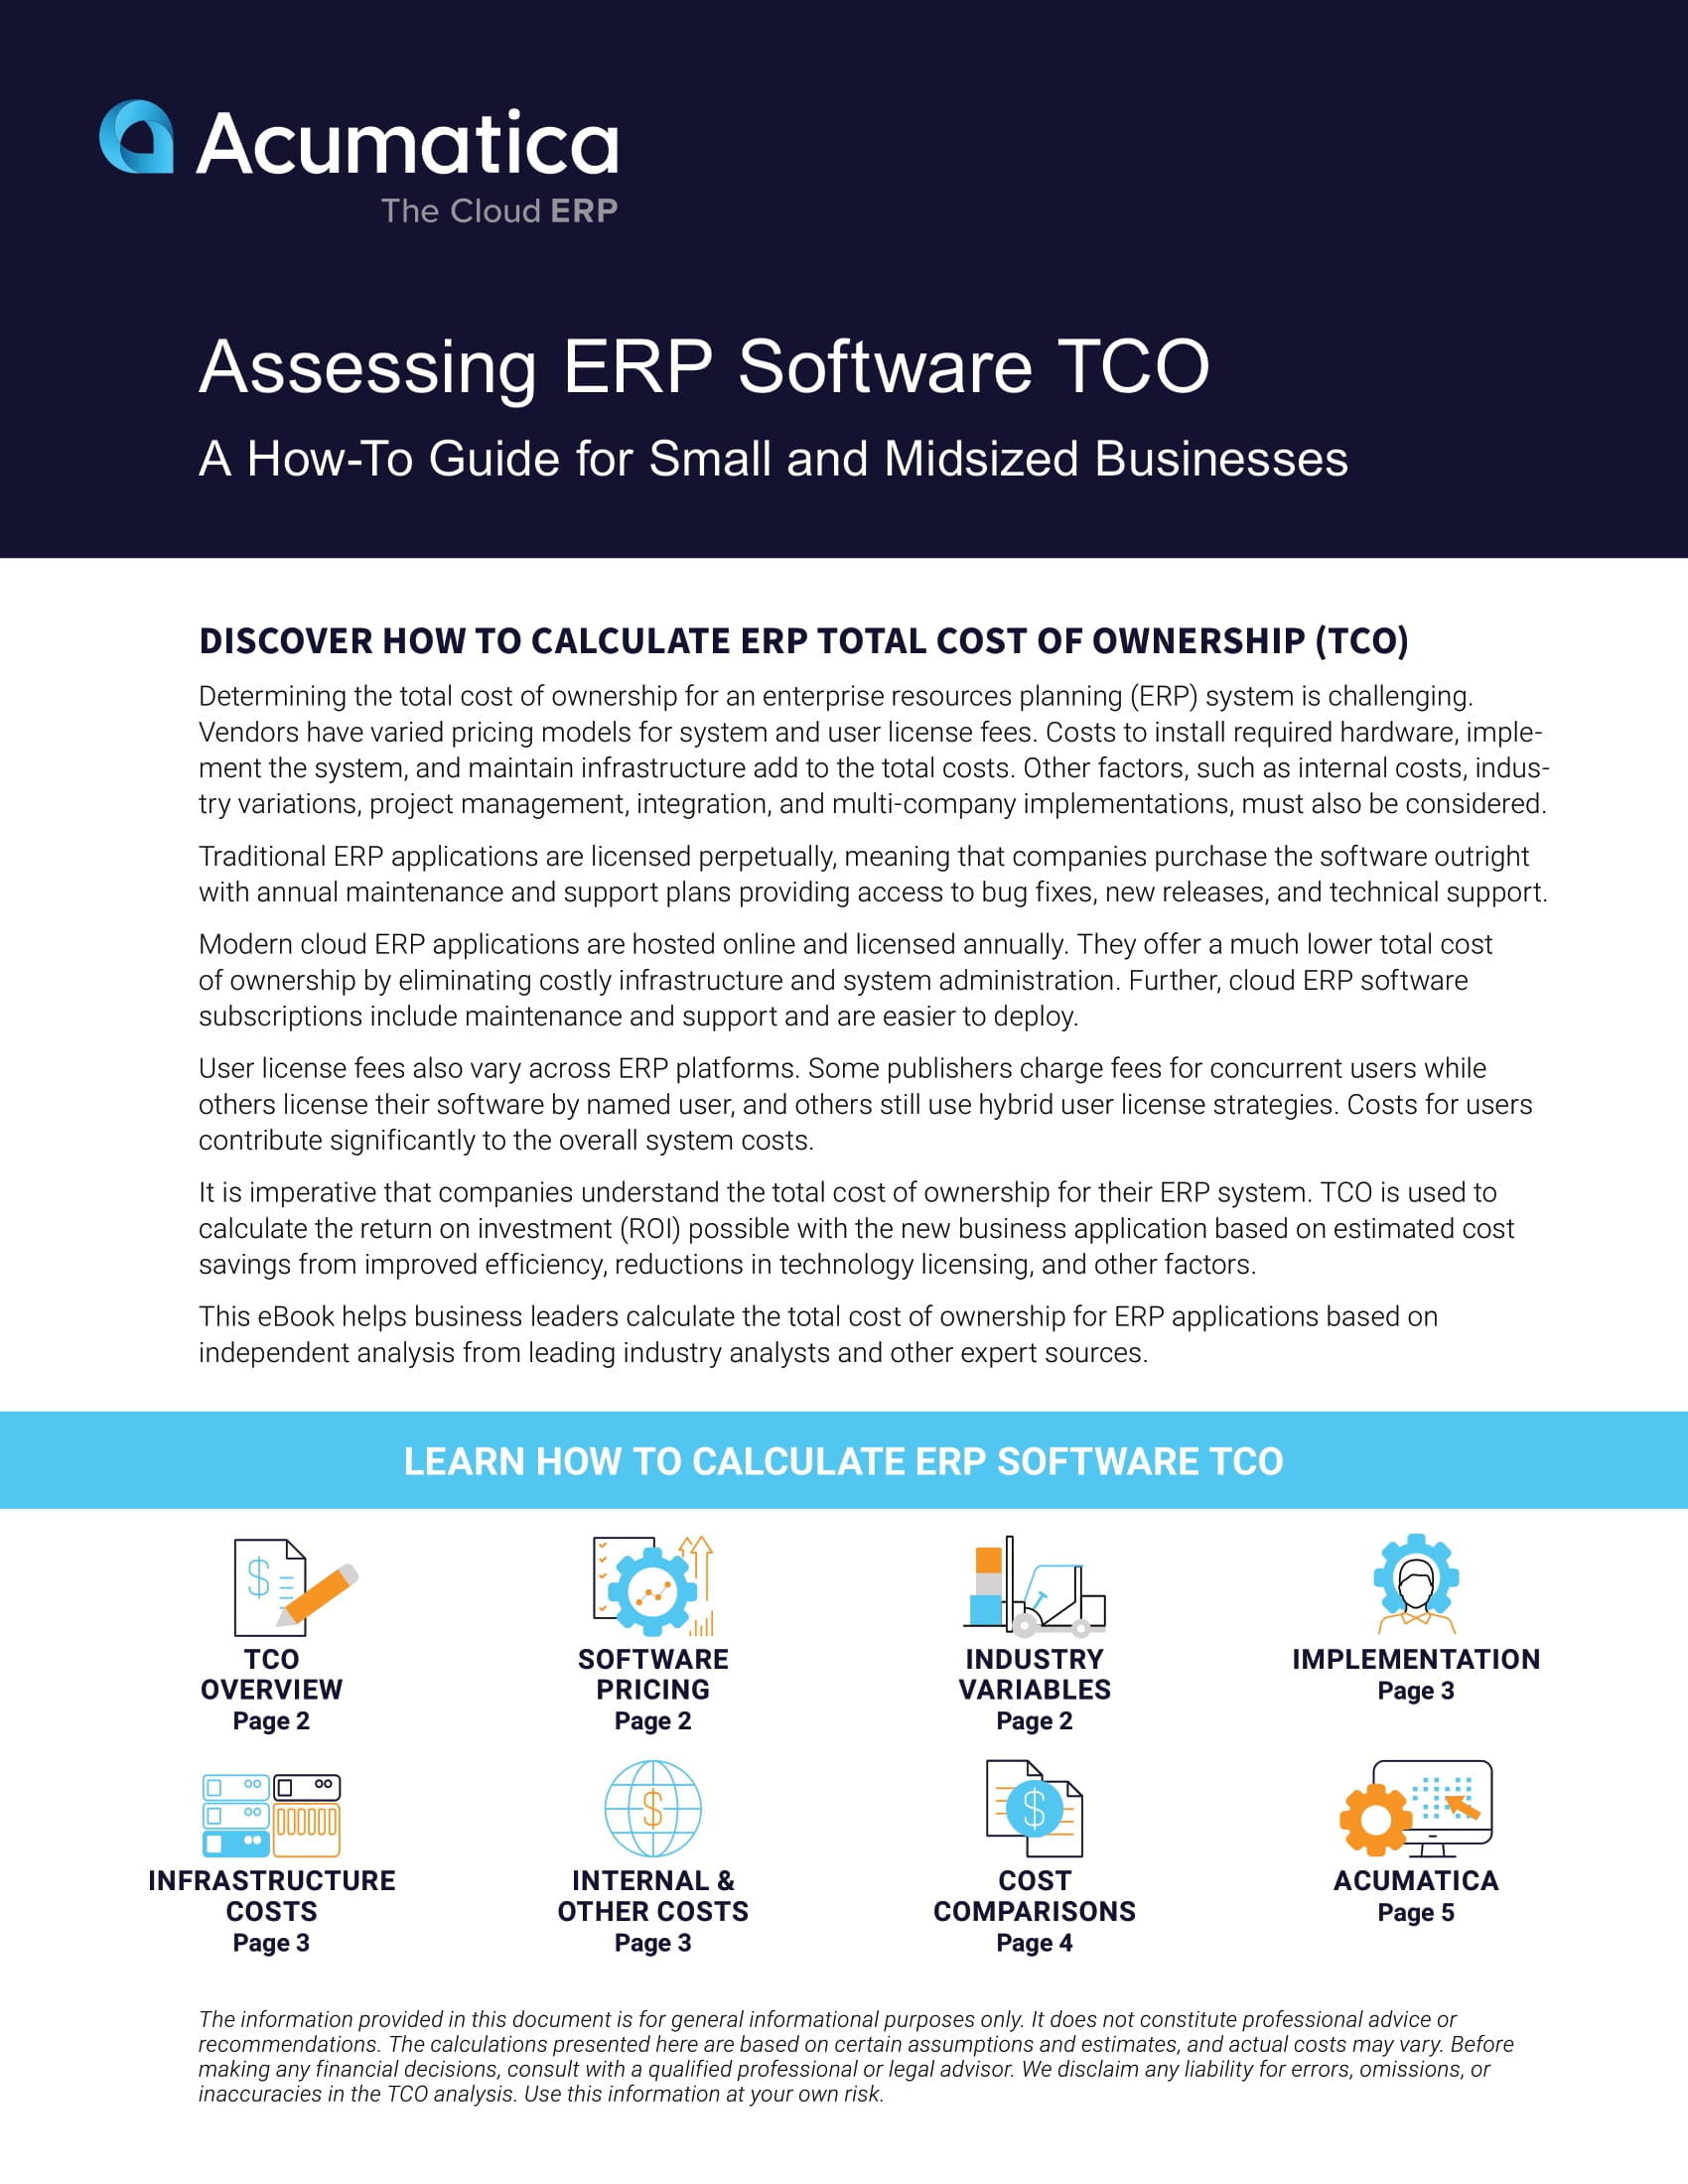 ERP_Software_TCO